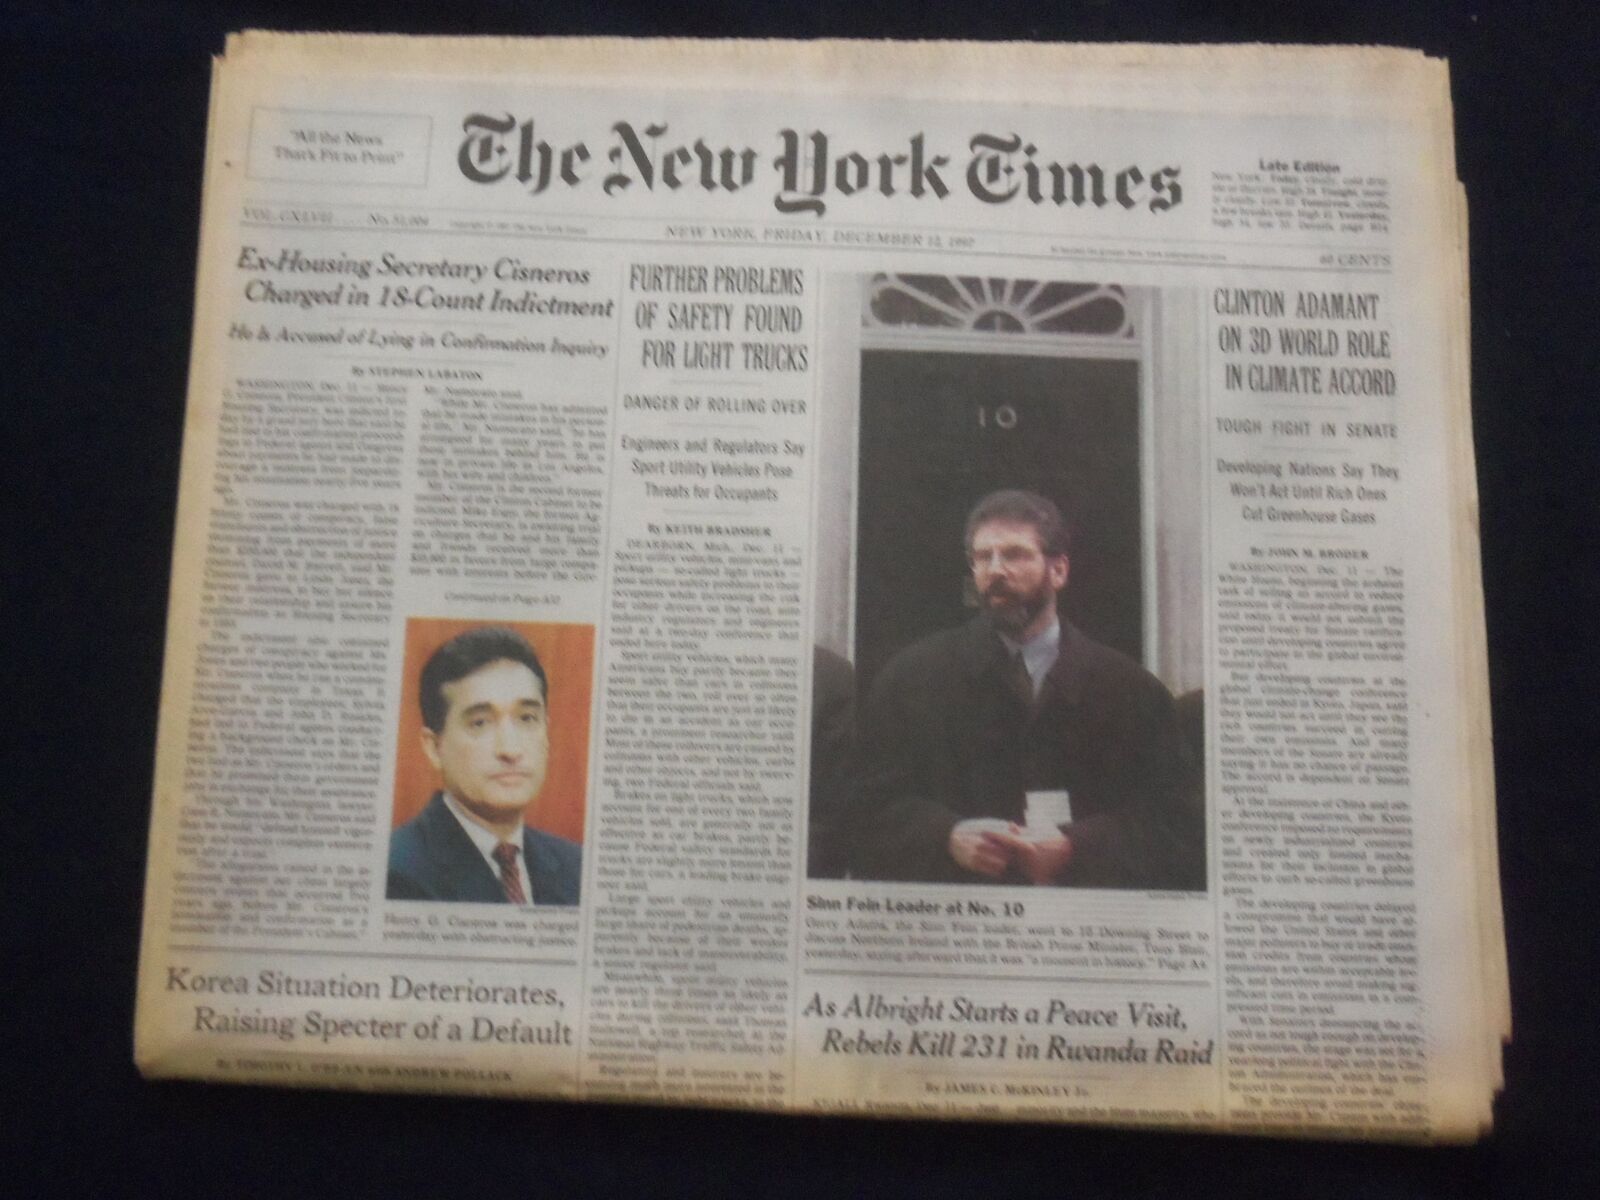 1997 DEC 12 NEW YORK TIMES NEWSPAPER -CLINTON 3RD WORLD CLIMATE ACCORD - NP 7085